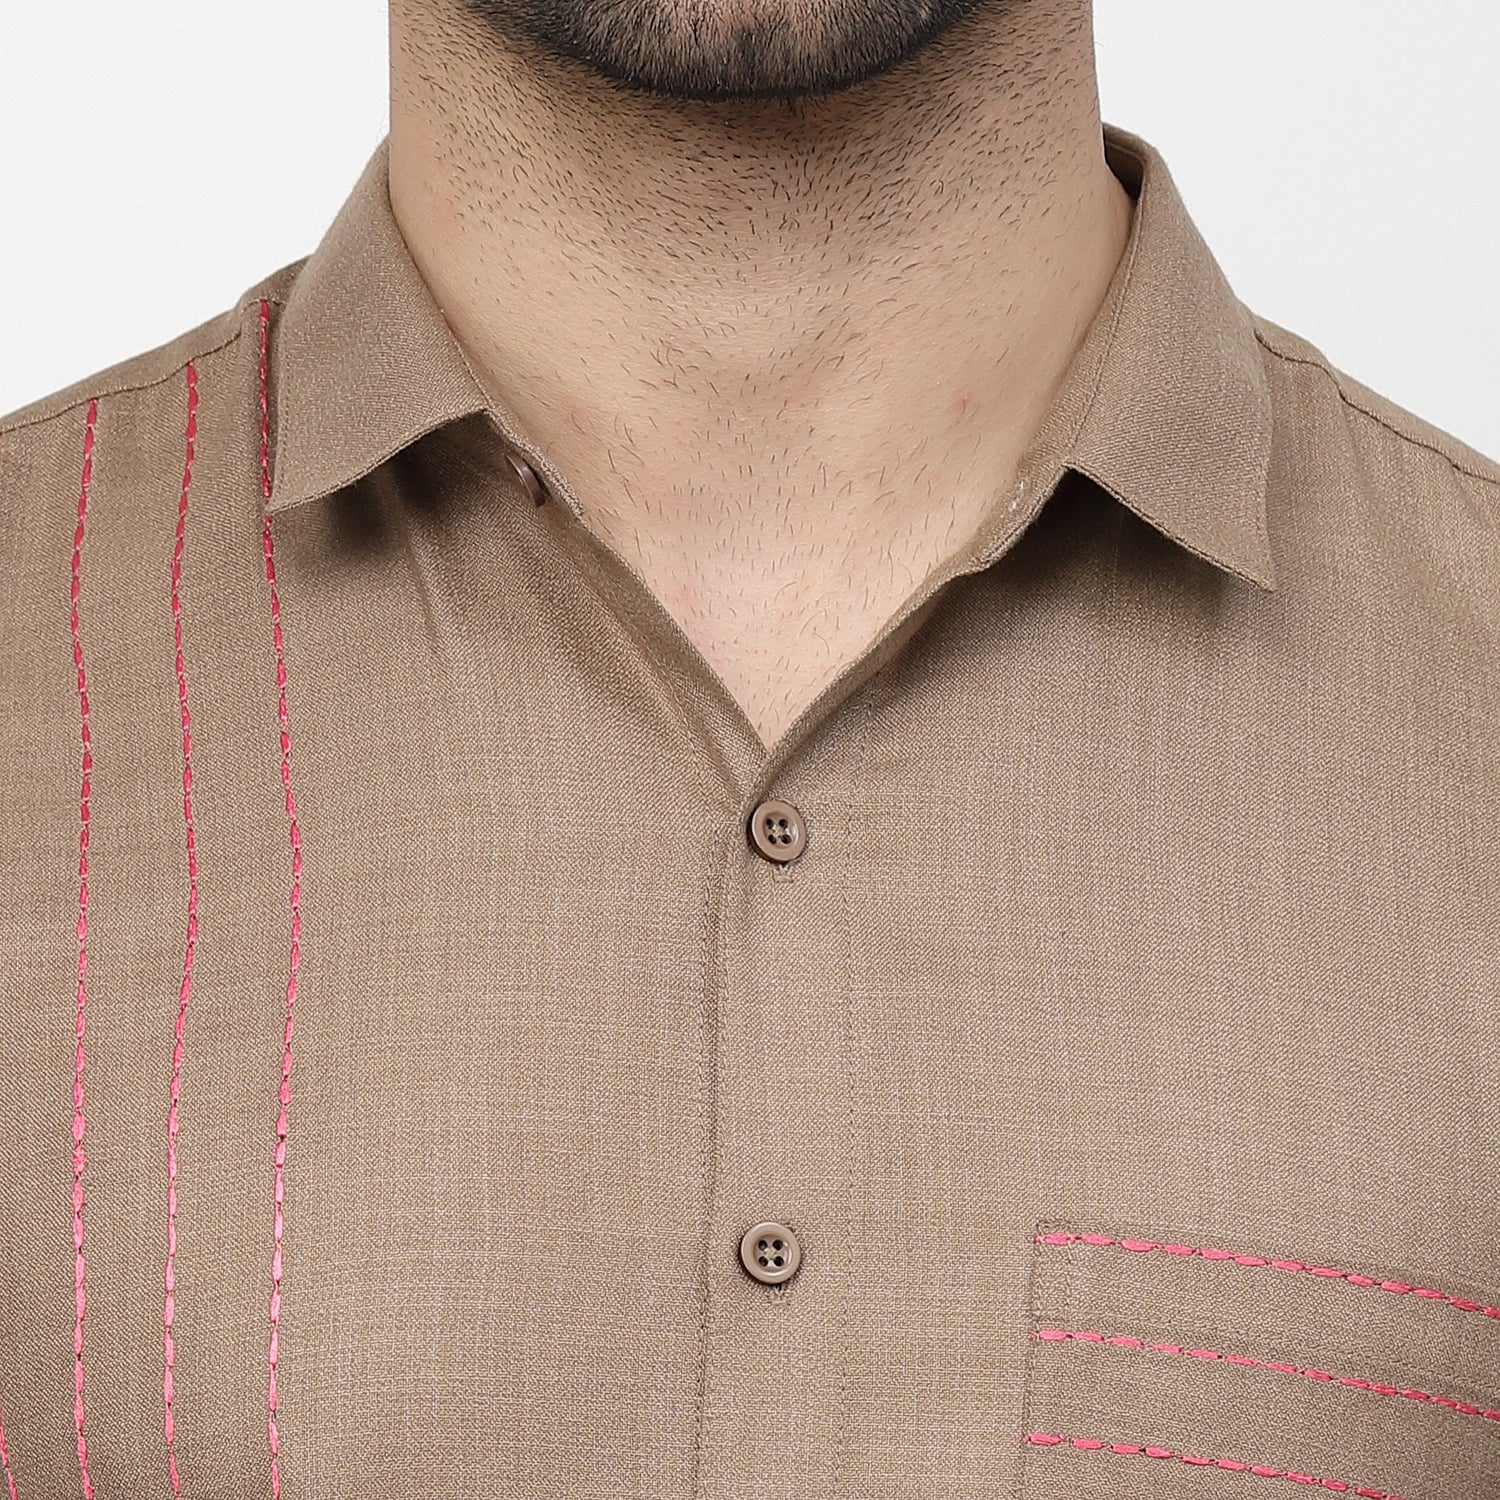 Linen Shirt With Stem Stitch Embroidery